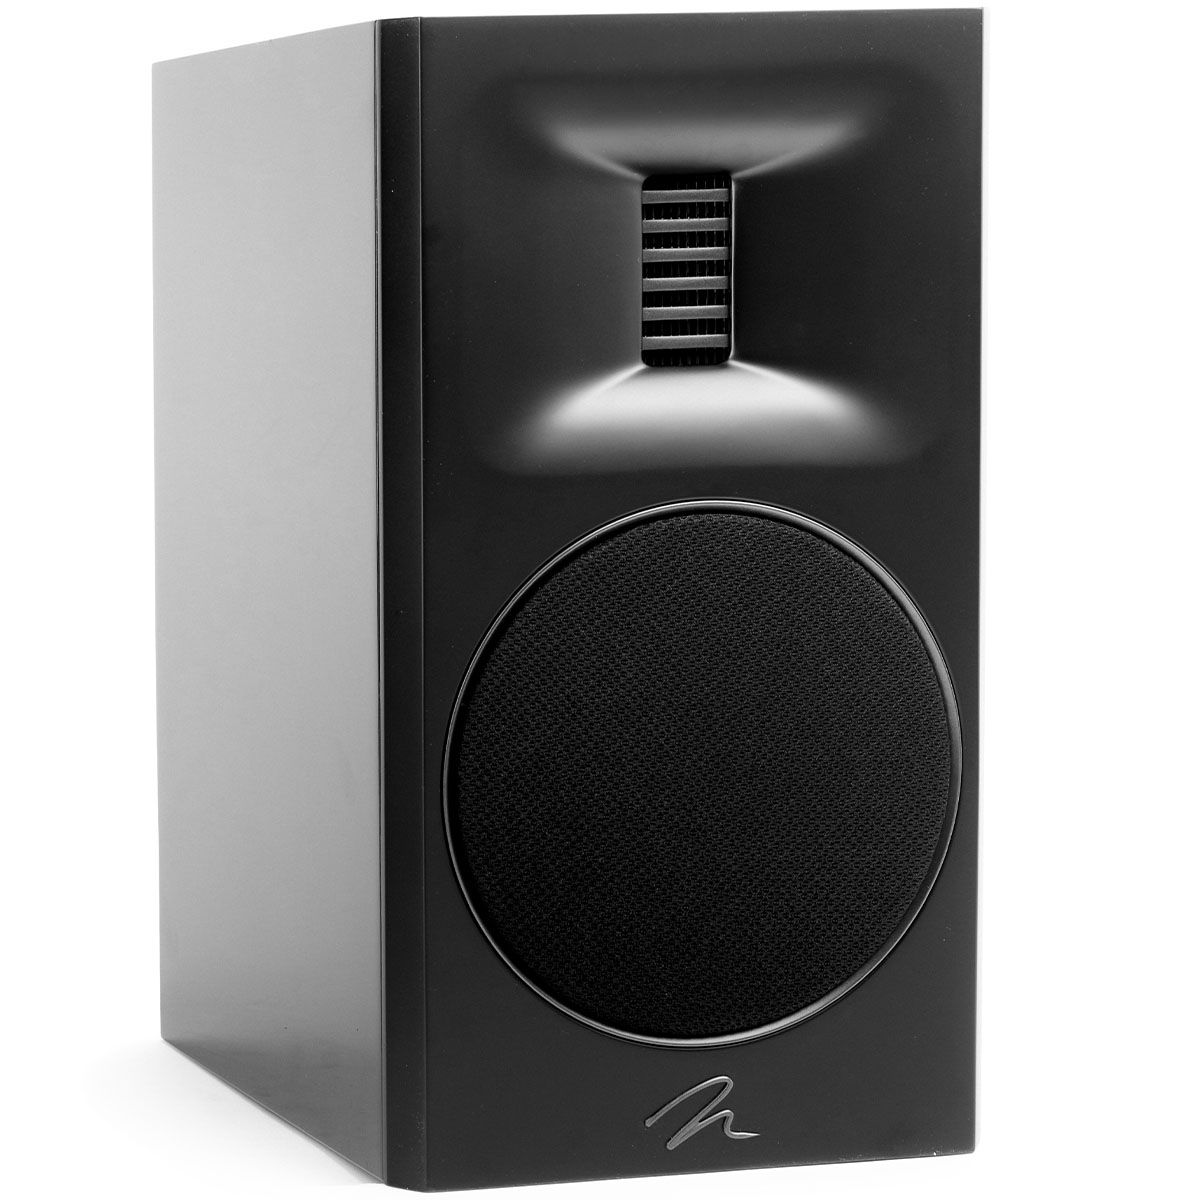 MartinLogan Motion XT B100  Bookshelf Speaker in black, angled view with grilles on white background